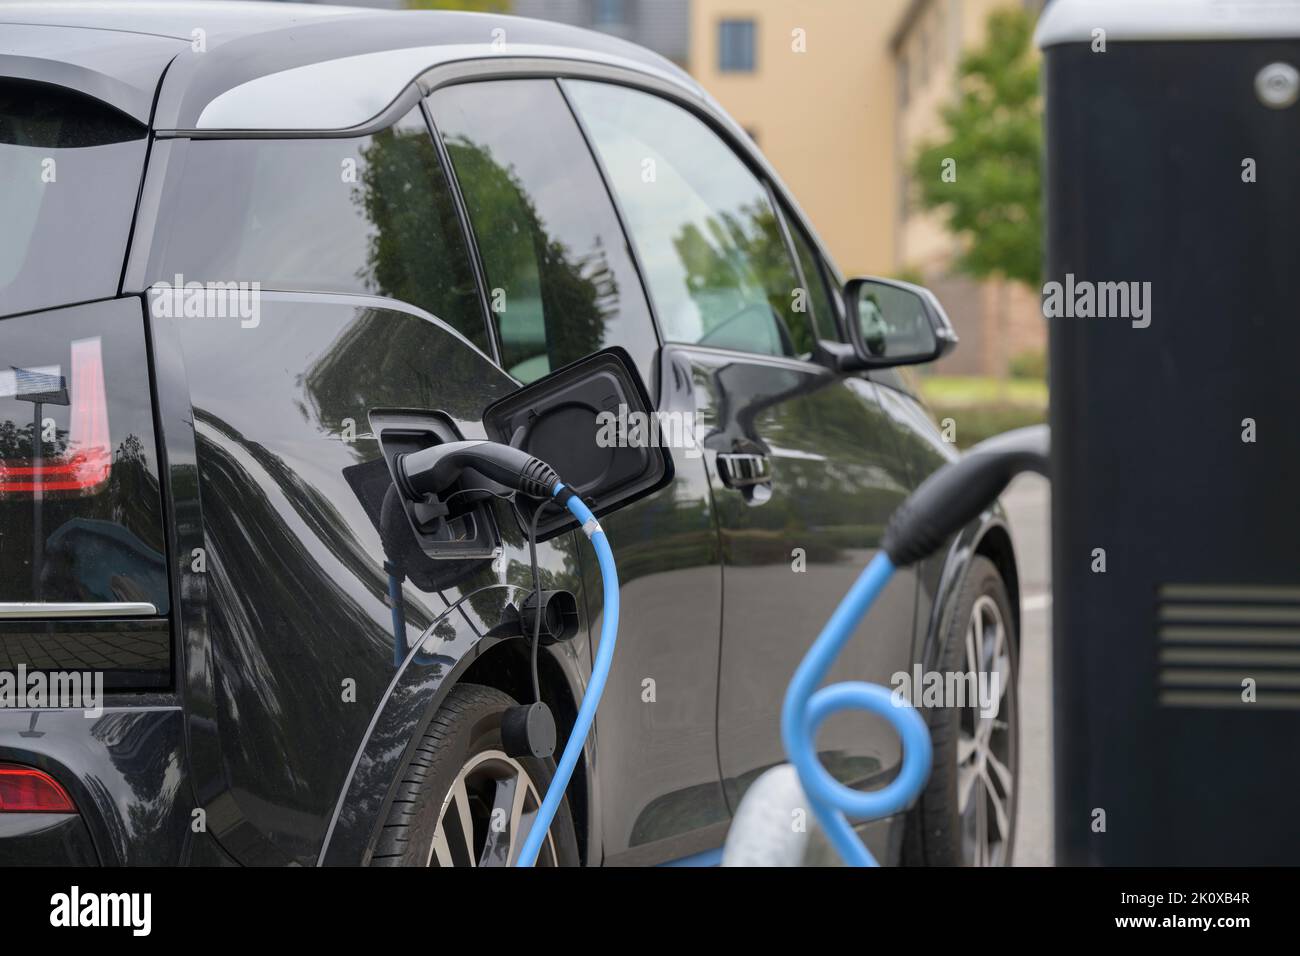 An electric car during the charging process Stock Photo